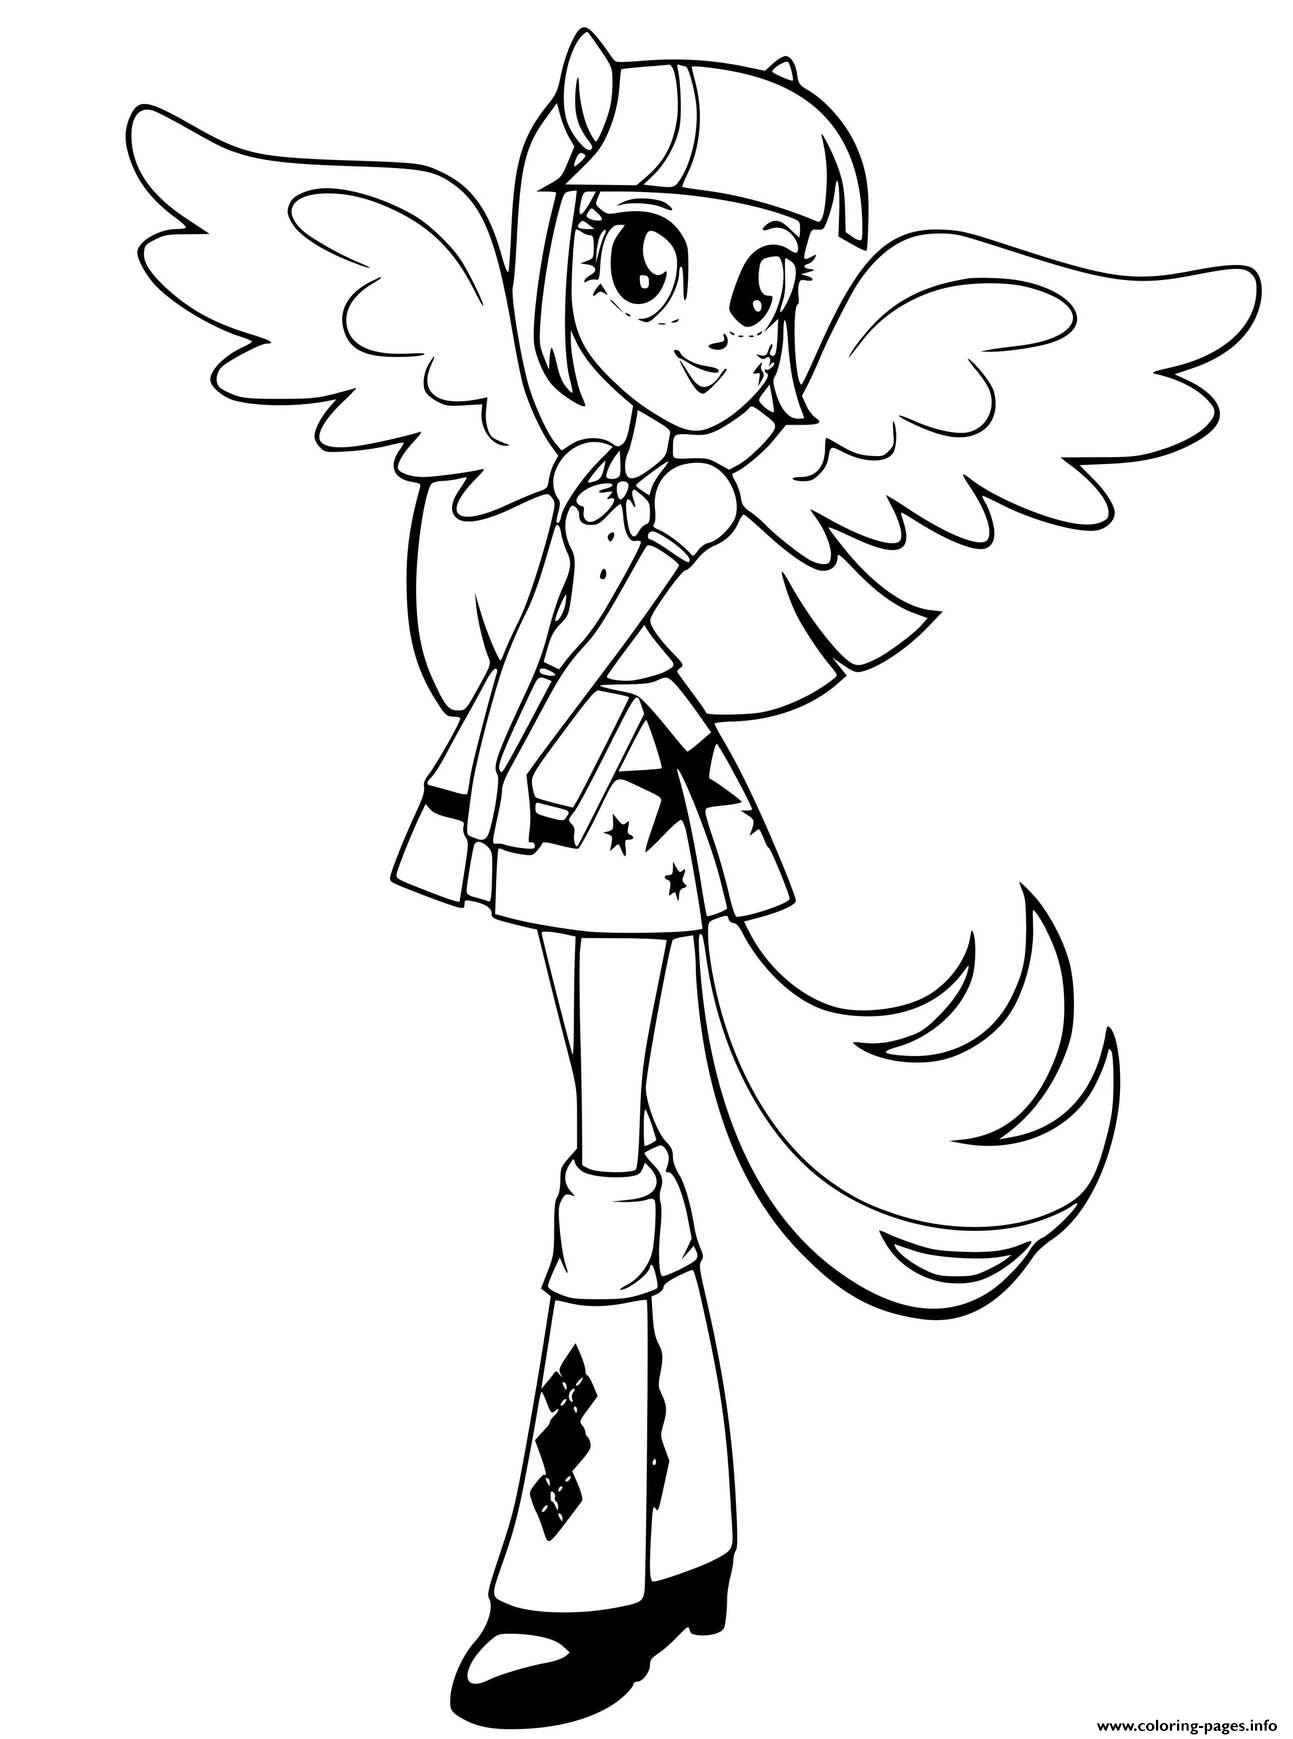 Rarity Twilight Sparkle Girl Coloring Pages Printable